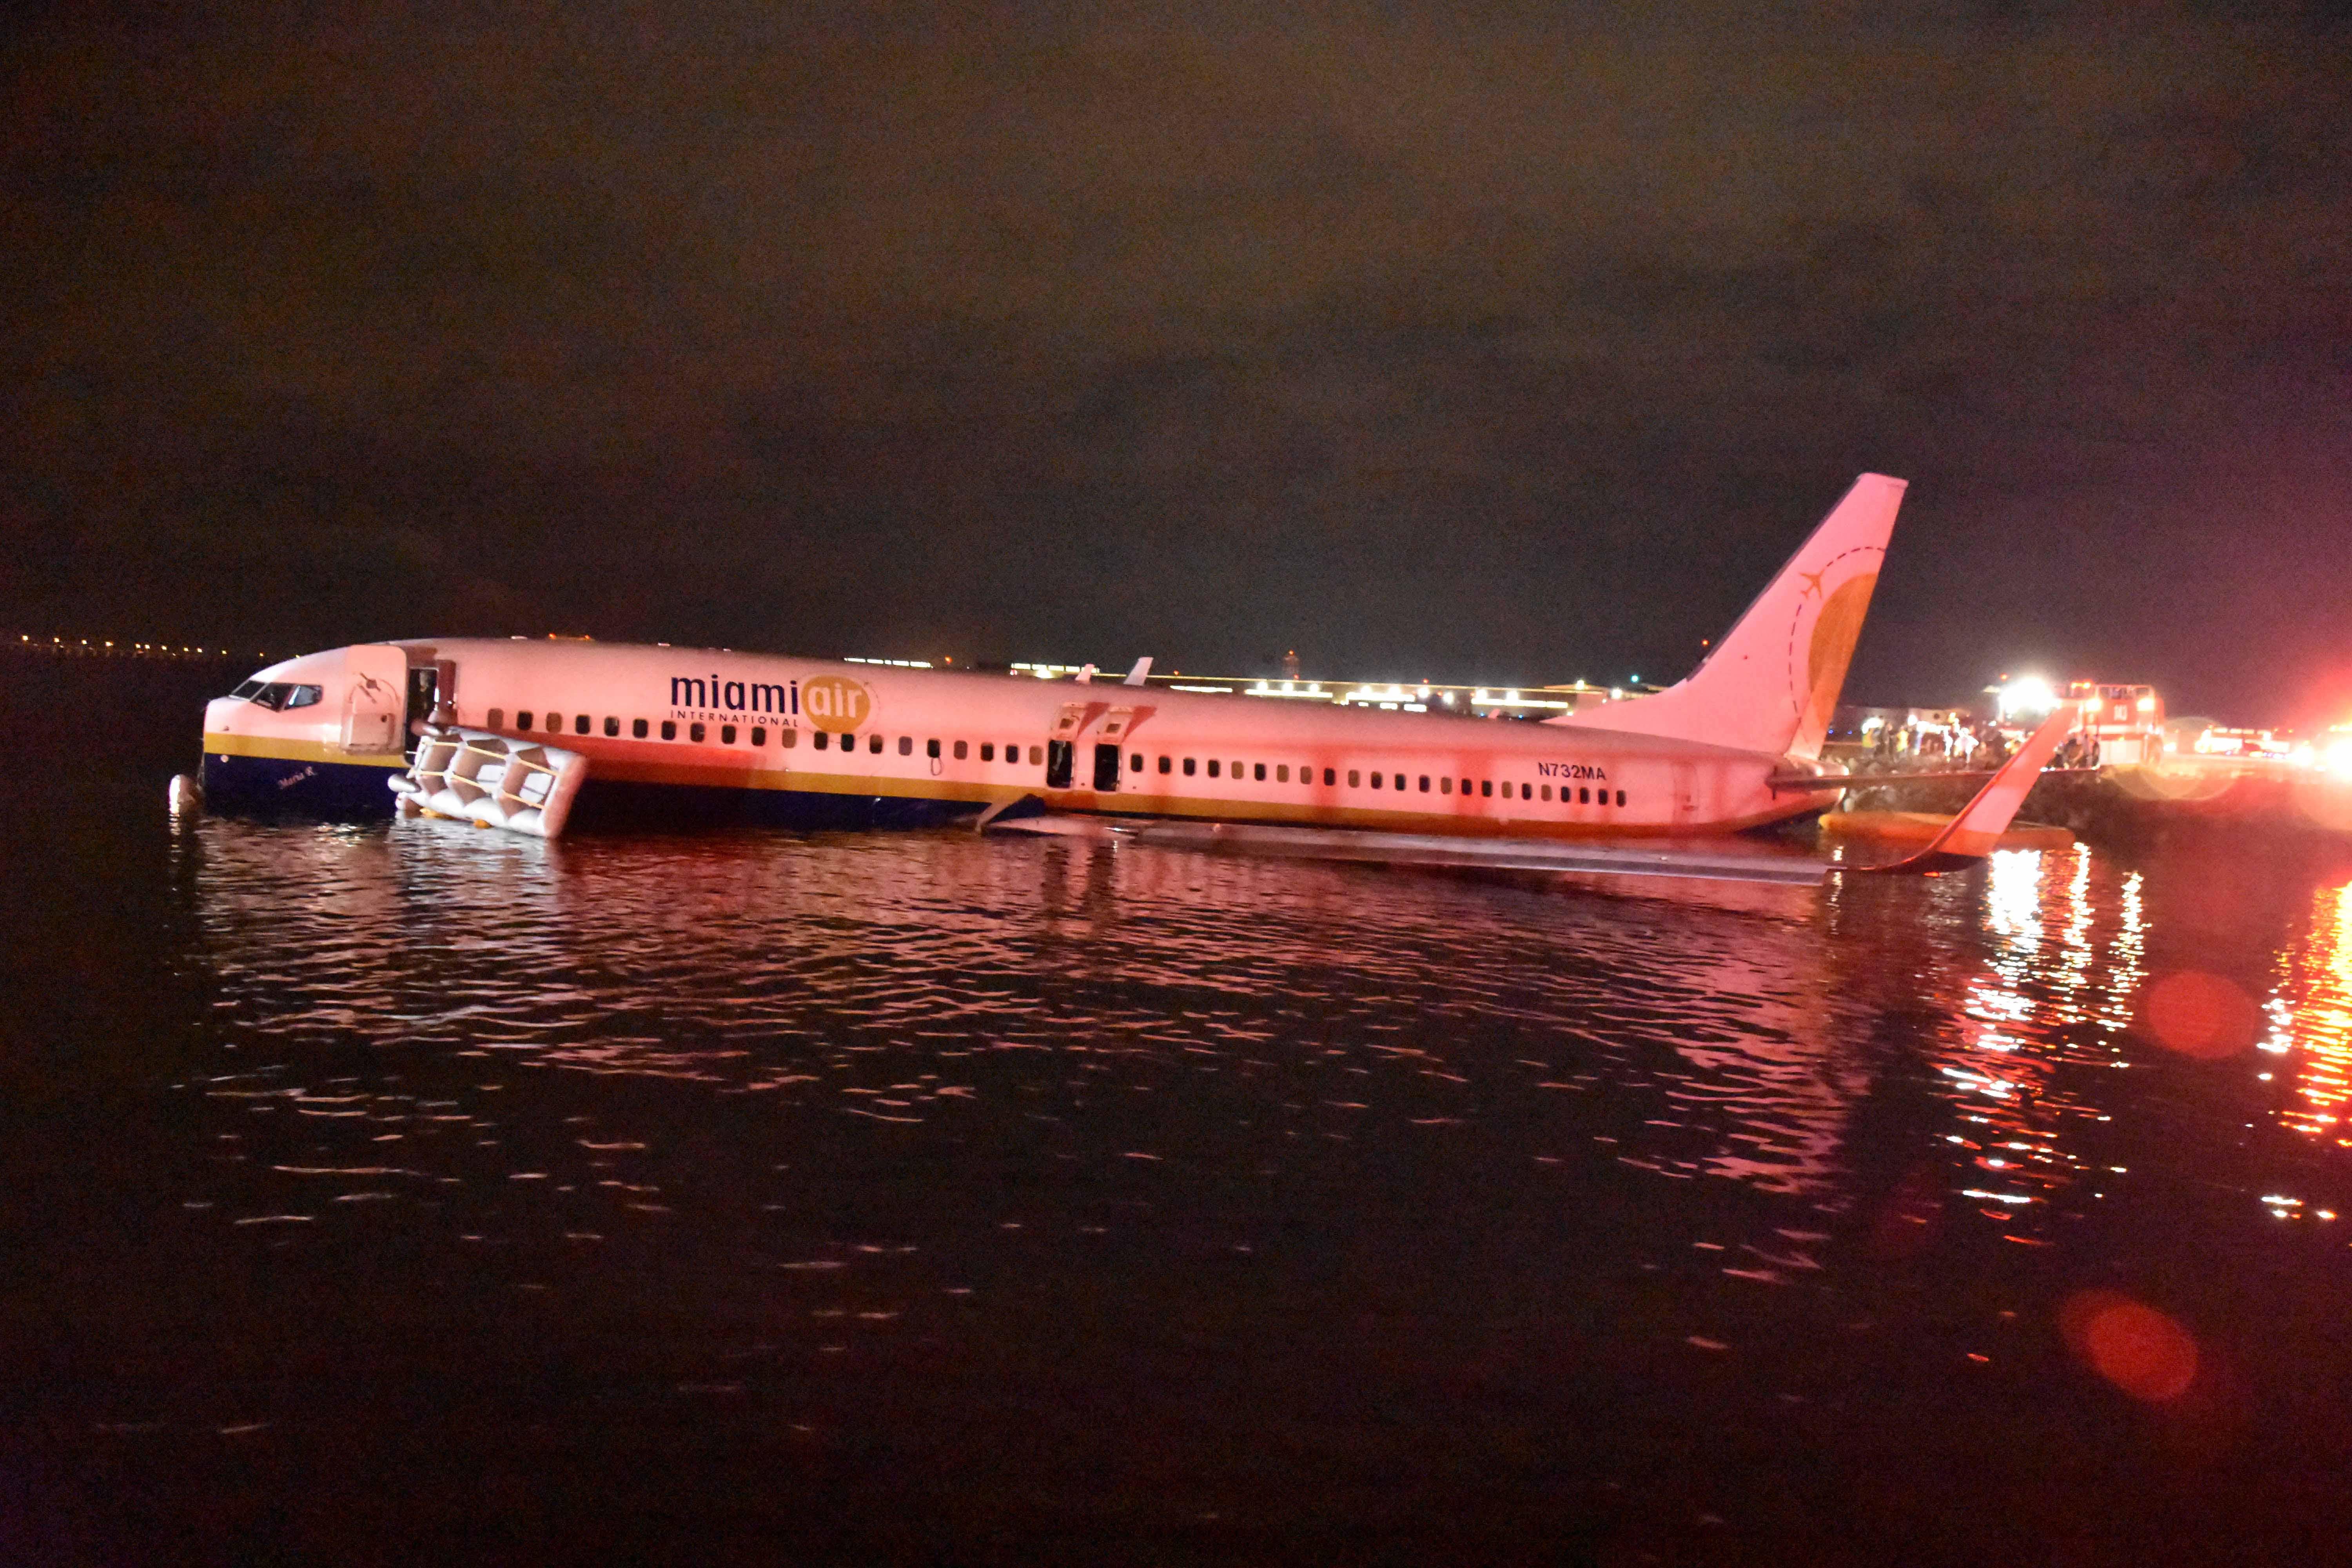 The plane resting on the water, lit by red emergency lights.